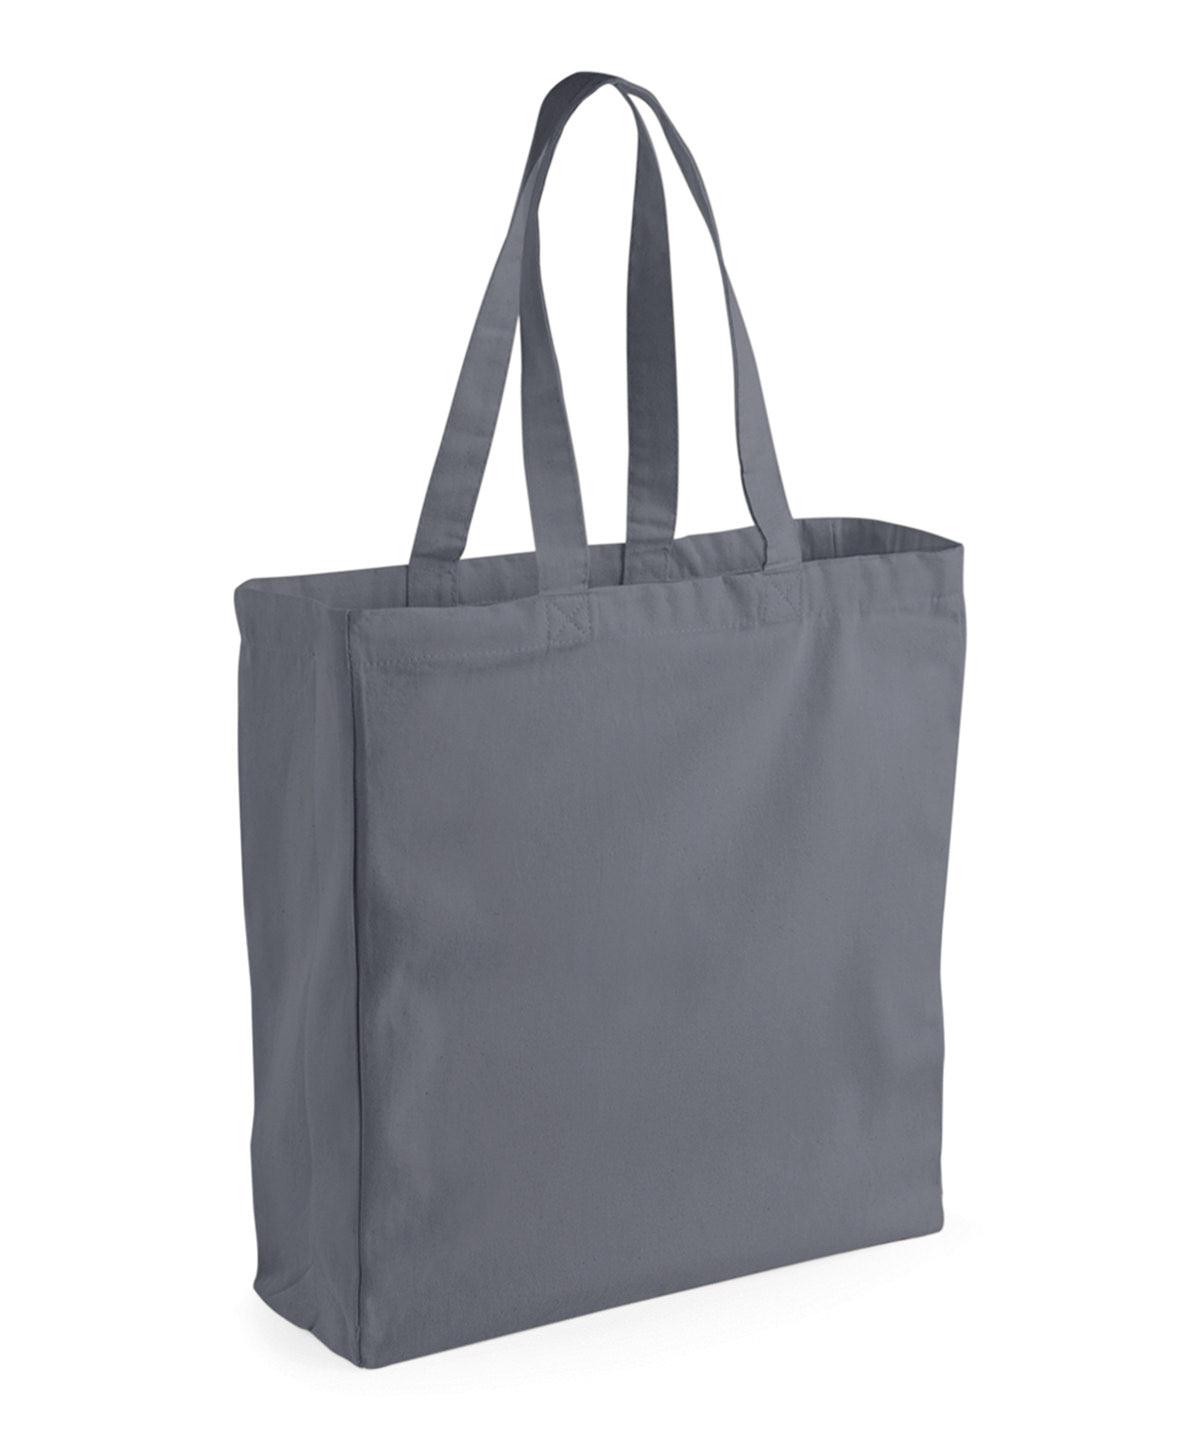 Graphite Grey - Canvas classic shopper Bags Westford Mill Bags & Luggage, Must Haves, New Colours For 2022 Schoolwear Centres